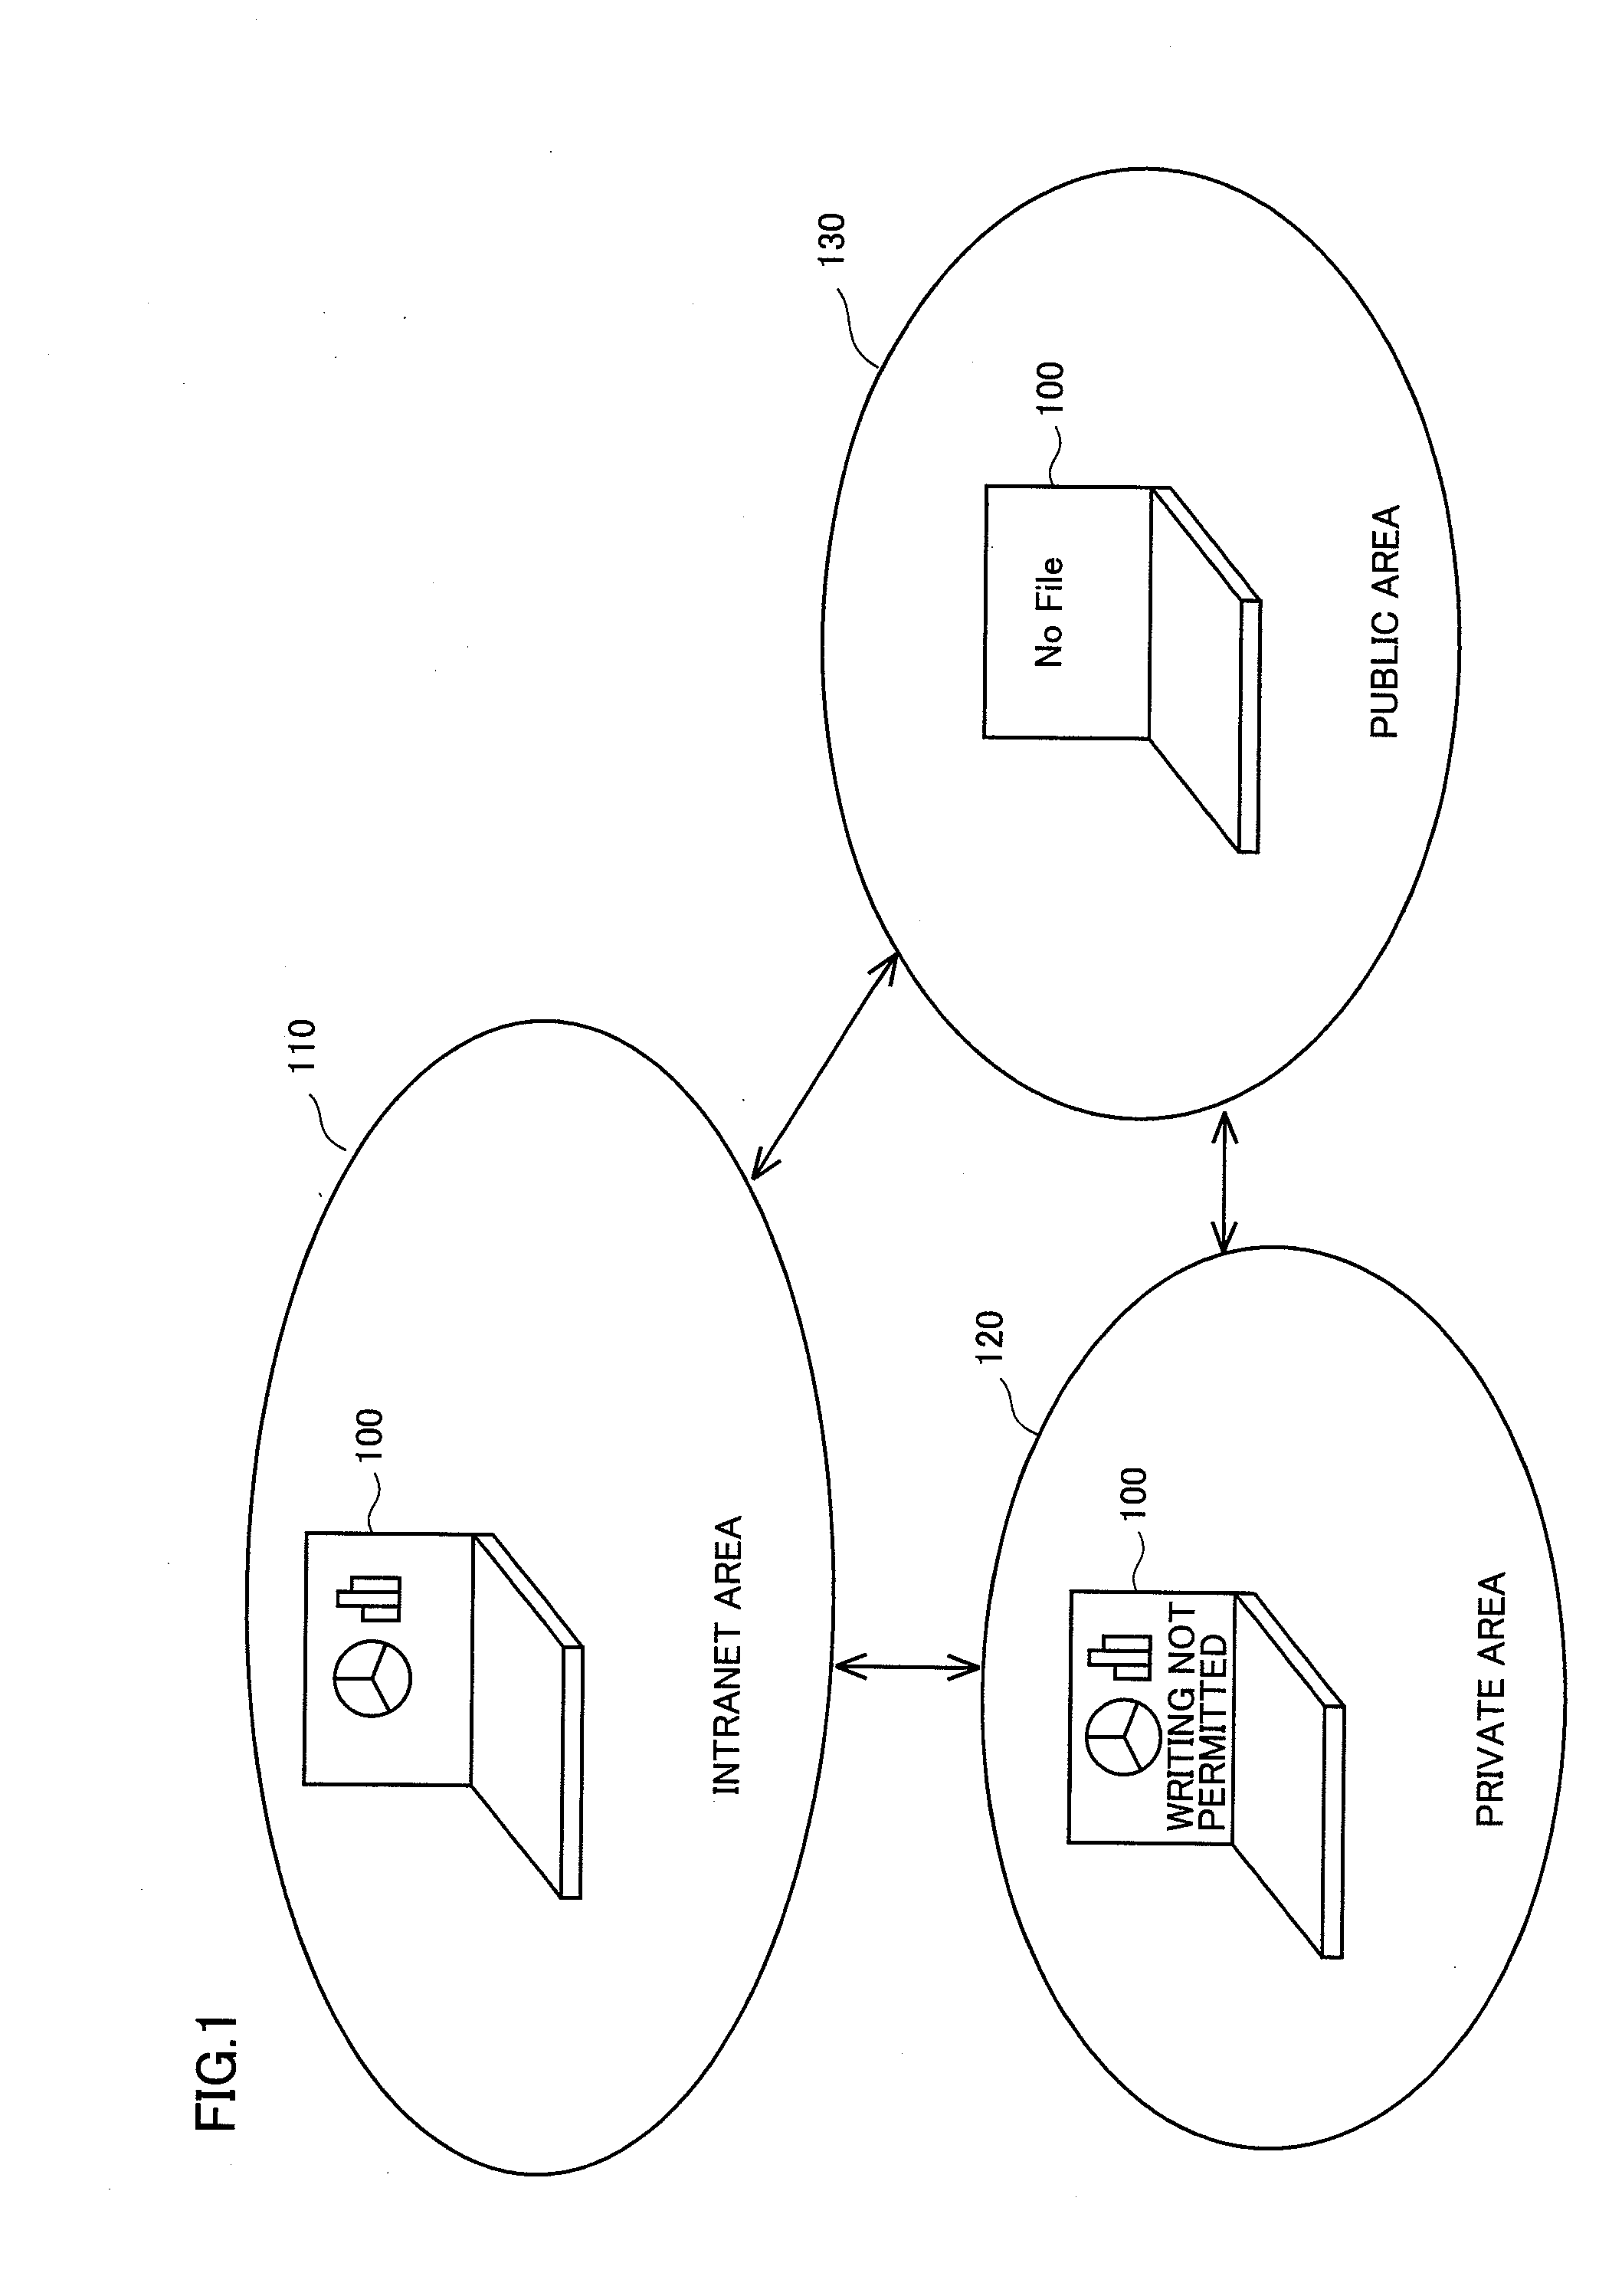 Wireless communication terminal, method for protecting data in wireless communication terminal, program for having wireless communication terminal protect data, and recording medium storing the program